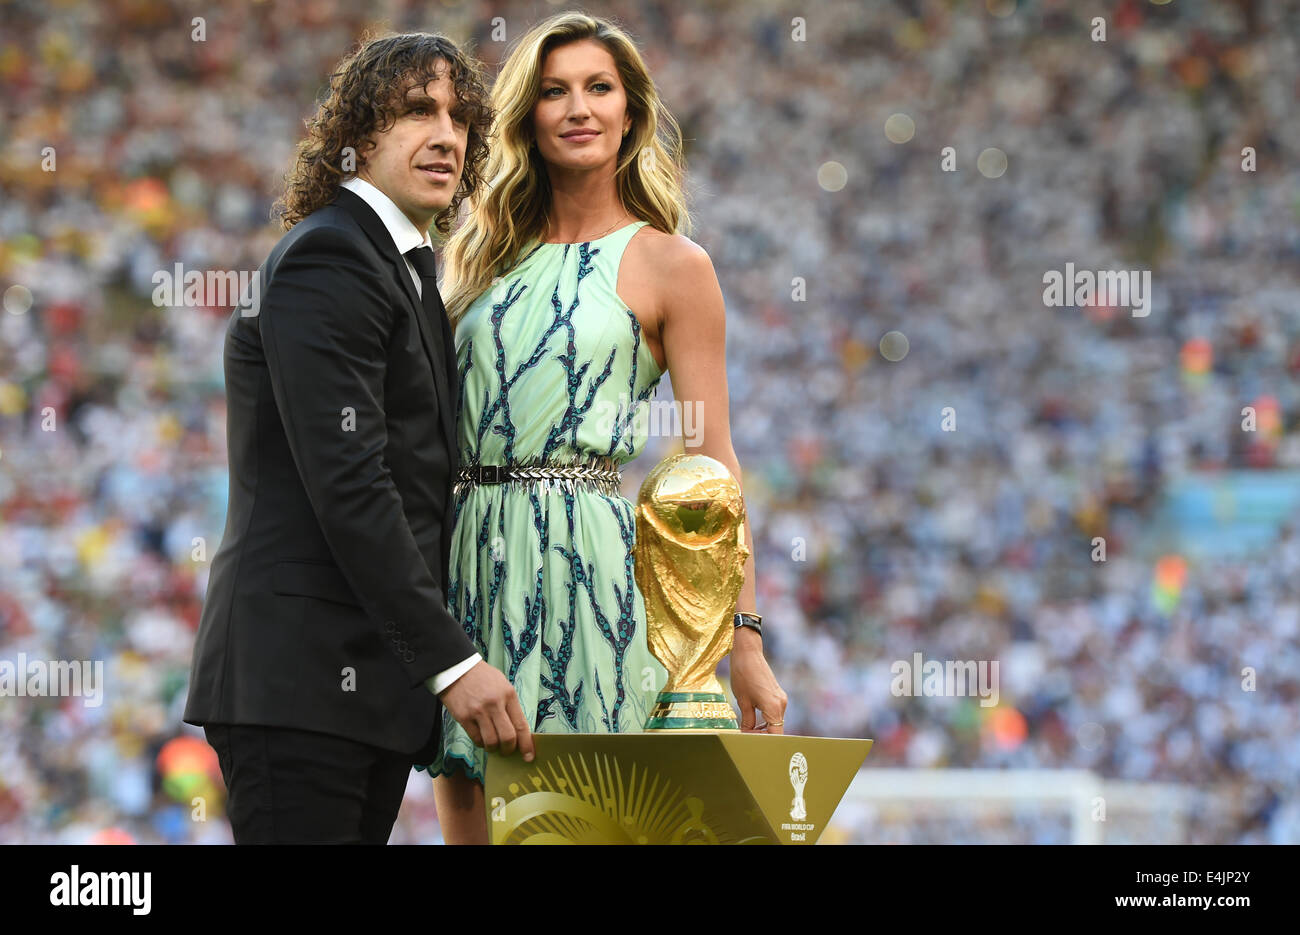 Rio de Janeiro, Brazil. 13th July, 2014. Former soccer Carles Puyol of Spain and Brazilian fashion model Gisele Buendchen pose with World Cup trophy prior to the FIFA World Cup 2014 final soccer match between Germany and Argentina at the Estadio do Maracana in Rio de Janeiro, Brazil, 13 July 2014. Photo: Andreas Gebert/dpa/Alamy Live News Stock Photo